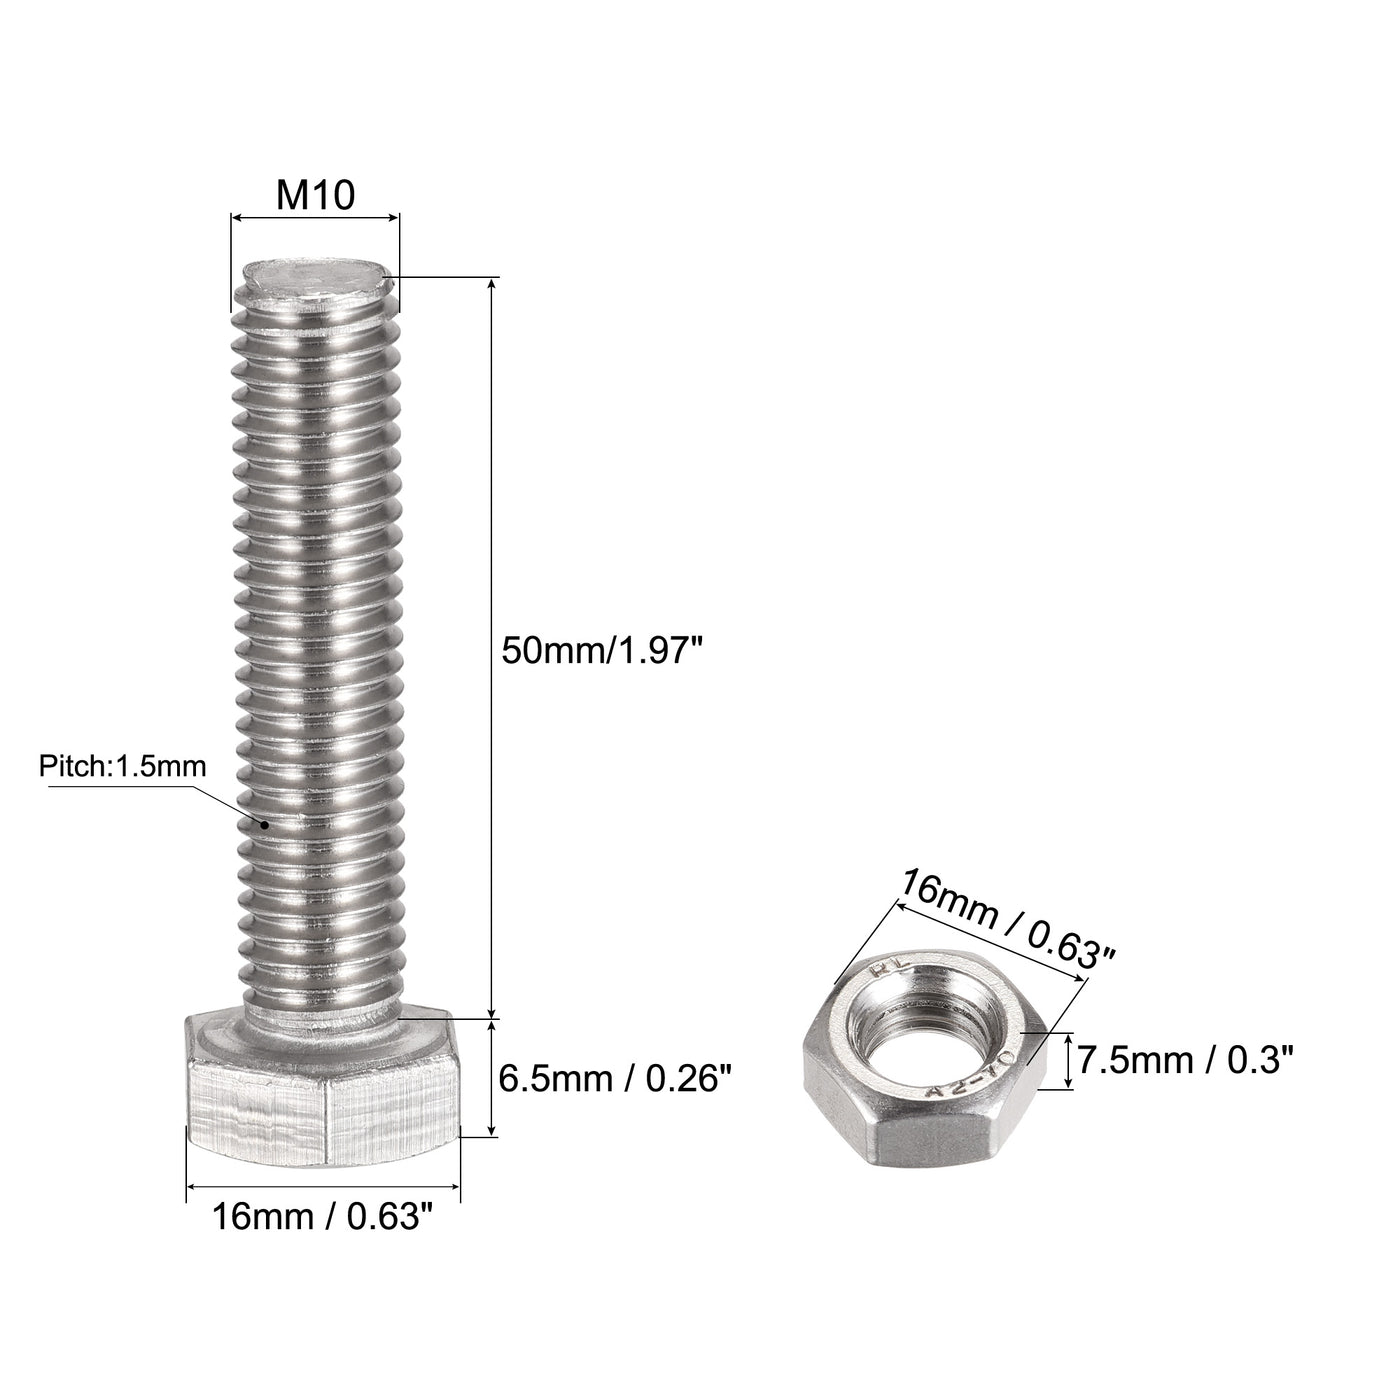 Uxcell Uxcell M10 x 45mm Hex Head Screws Bolts, Nuts, Flat & Lock Washers Kits, 304 Stainless Steel Fully Thread Hexagon Bolts 4 Sets